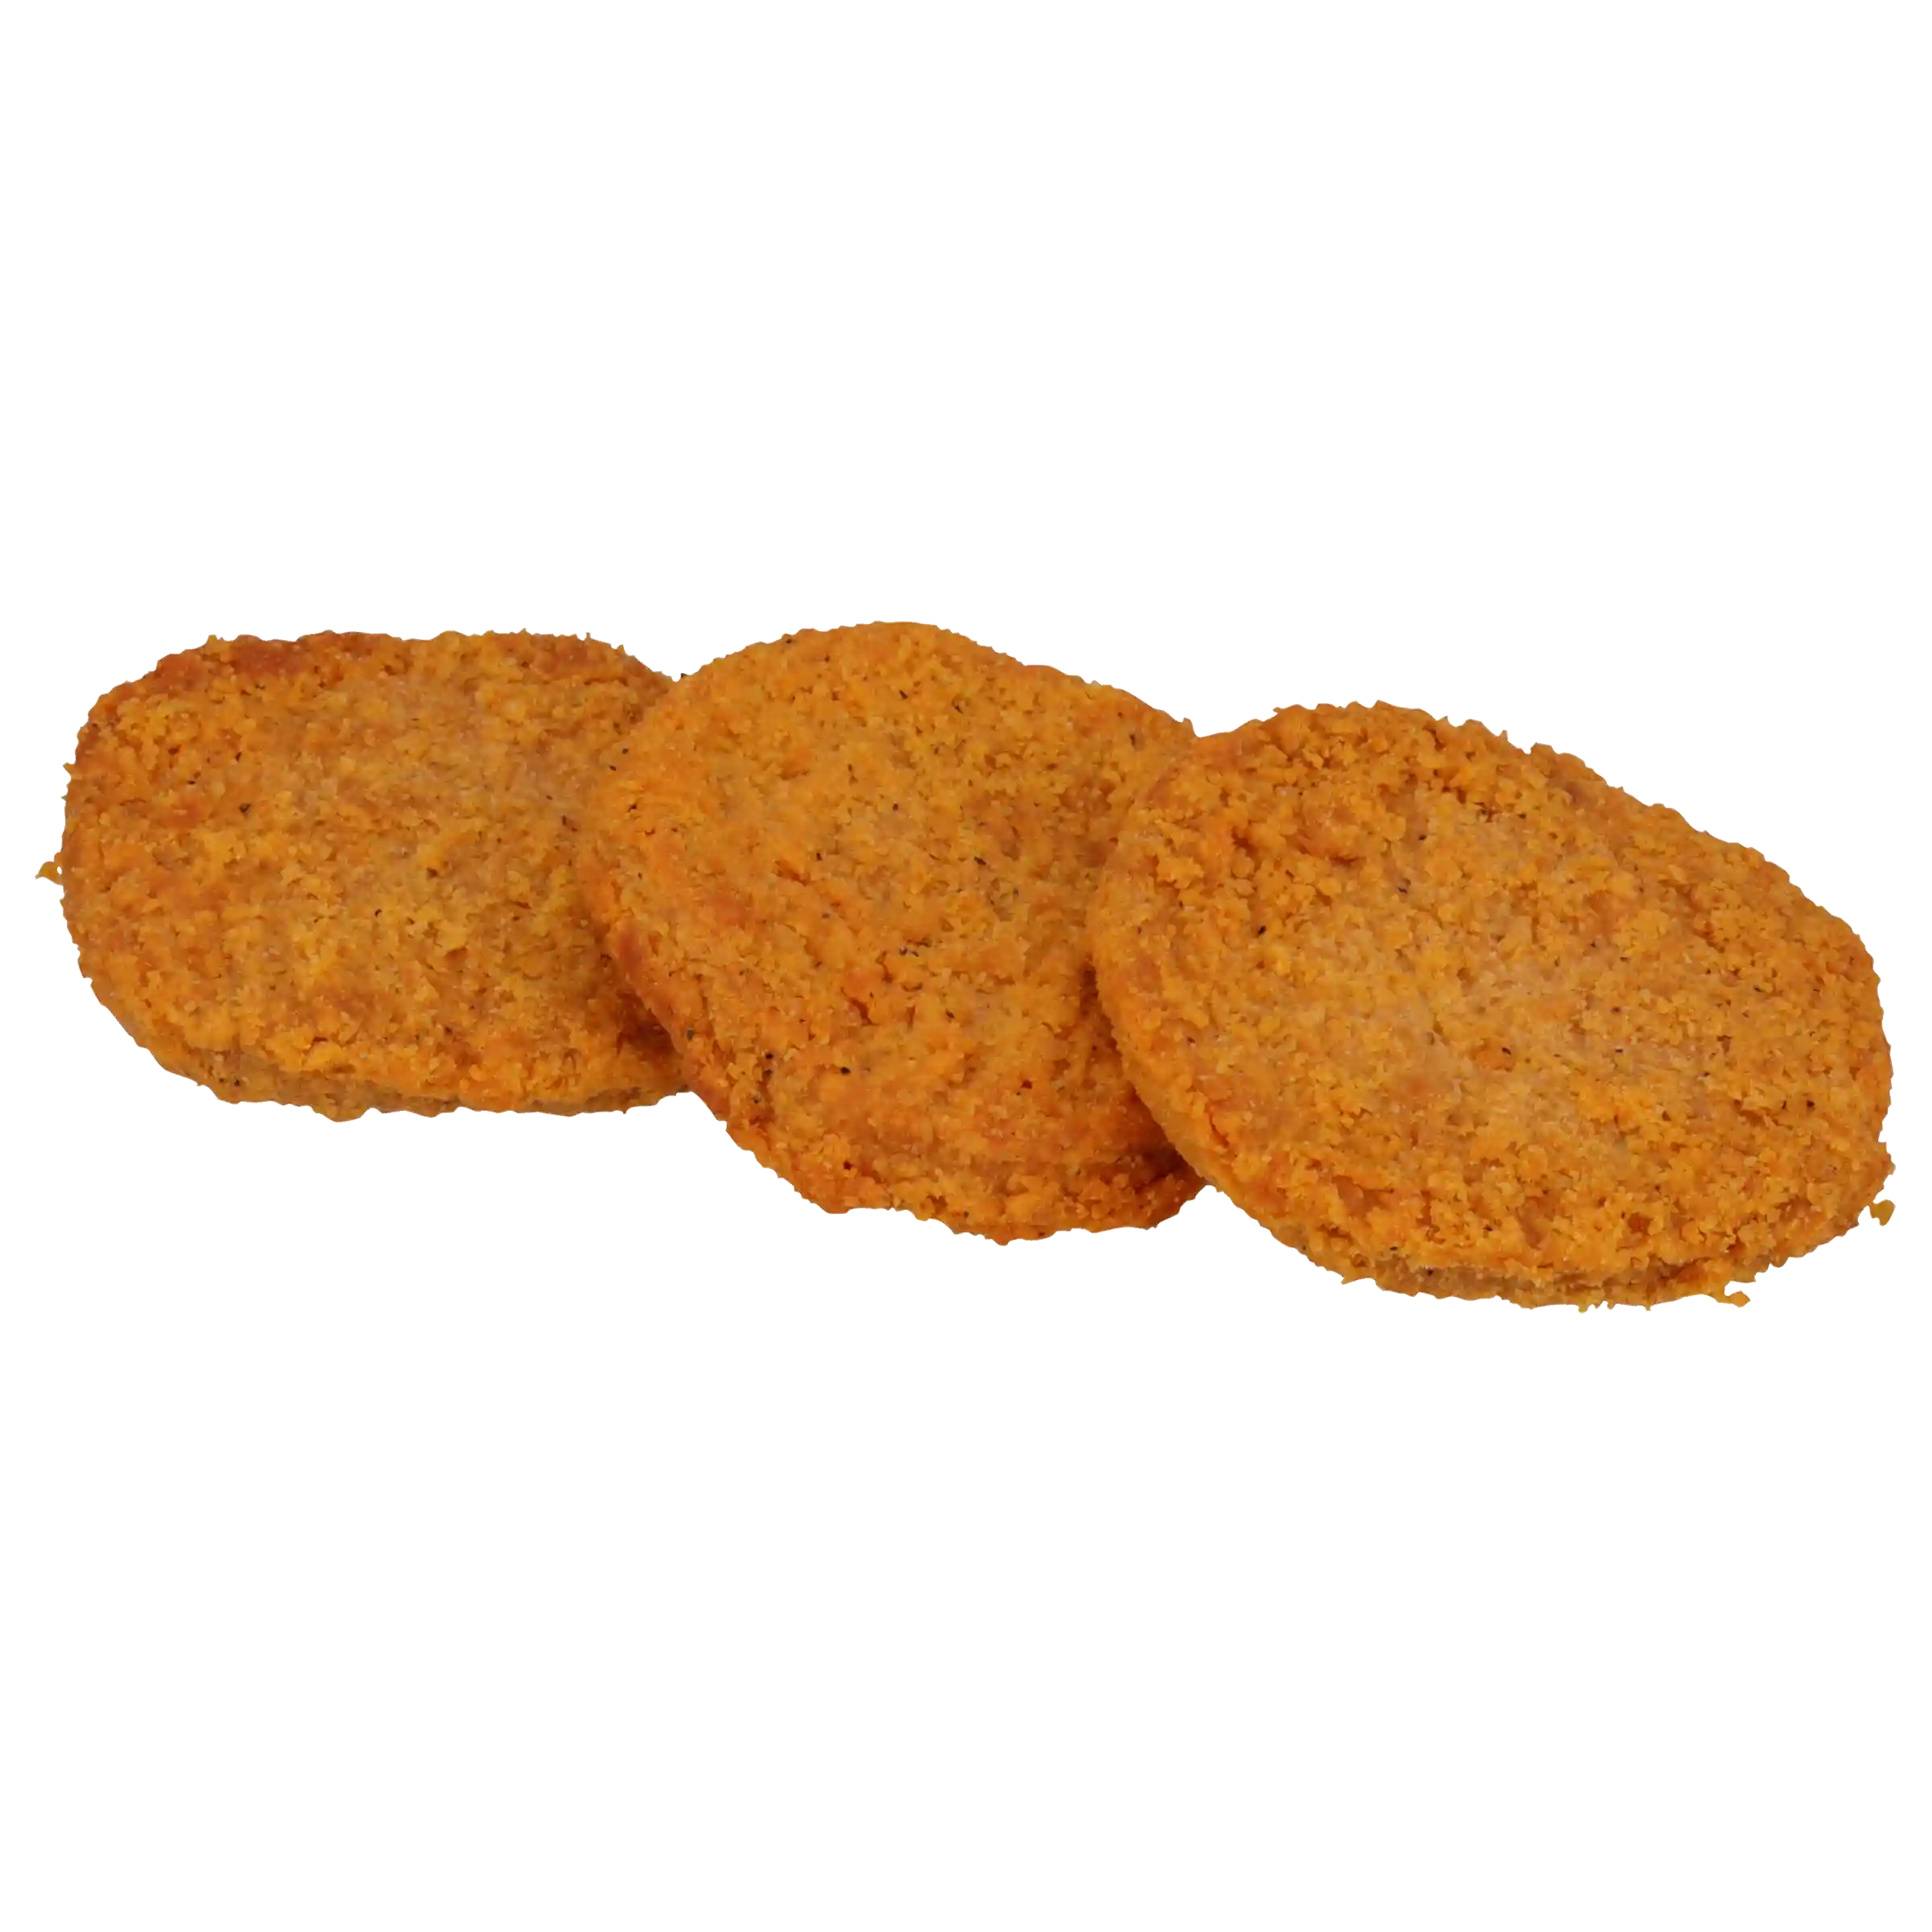 Tyson® Fully Cooked Whole Grain Breaded Hot & Spicy Chicken Patties, CN, 3 oz. _image_11